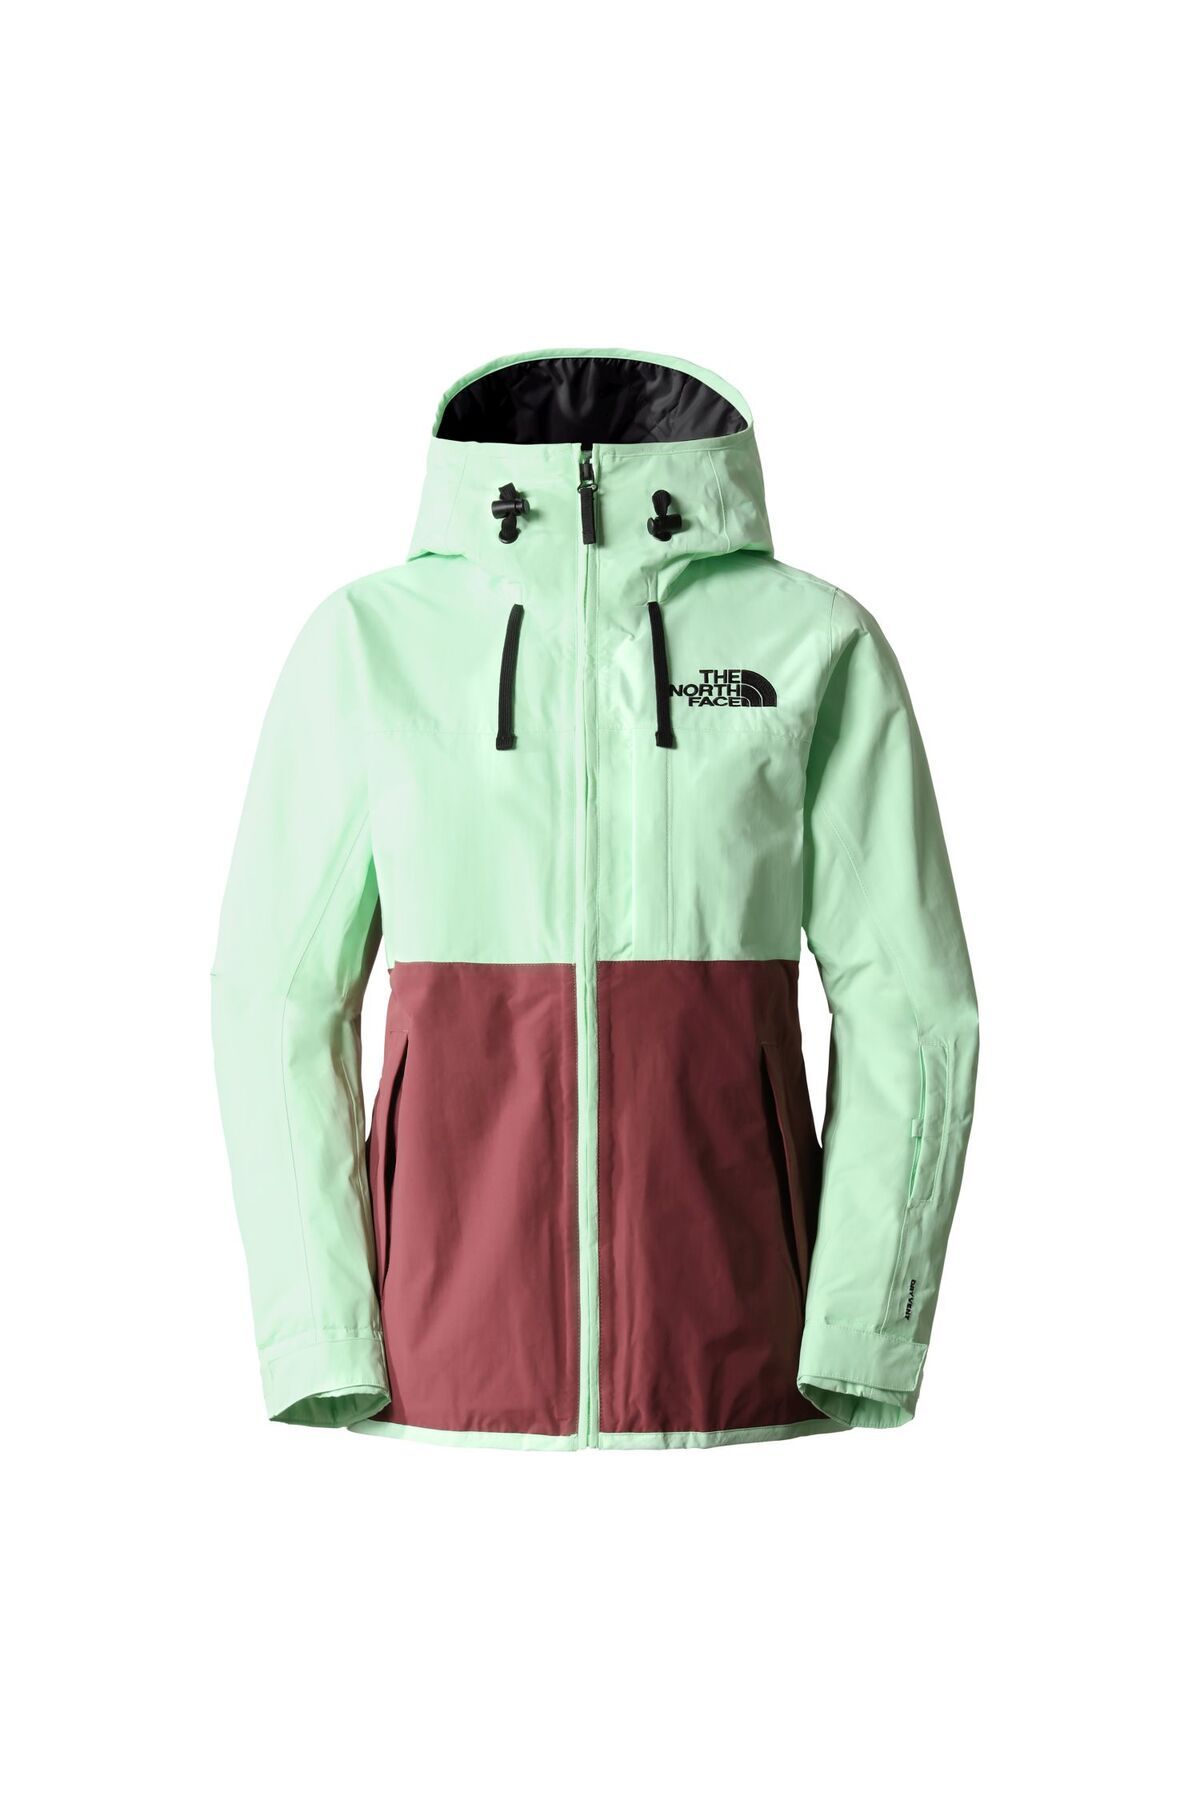 The North Face w superlu jacket